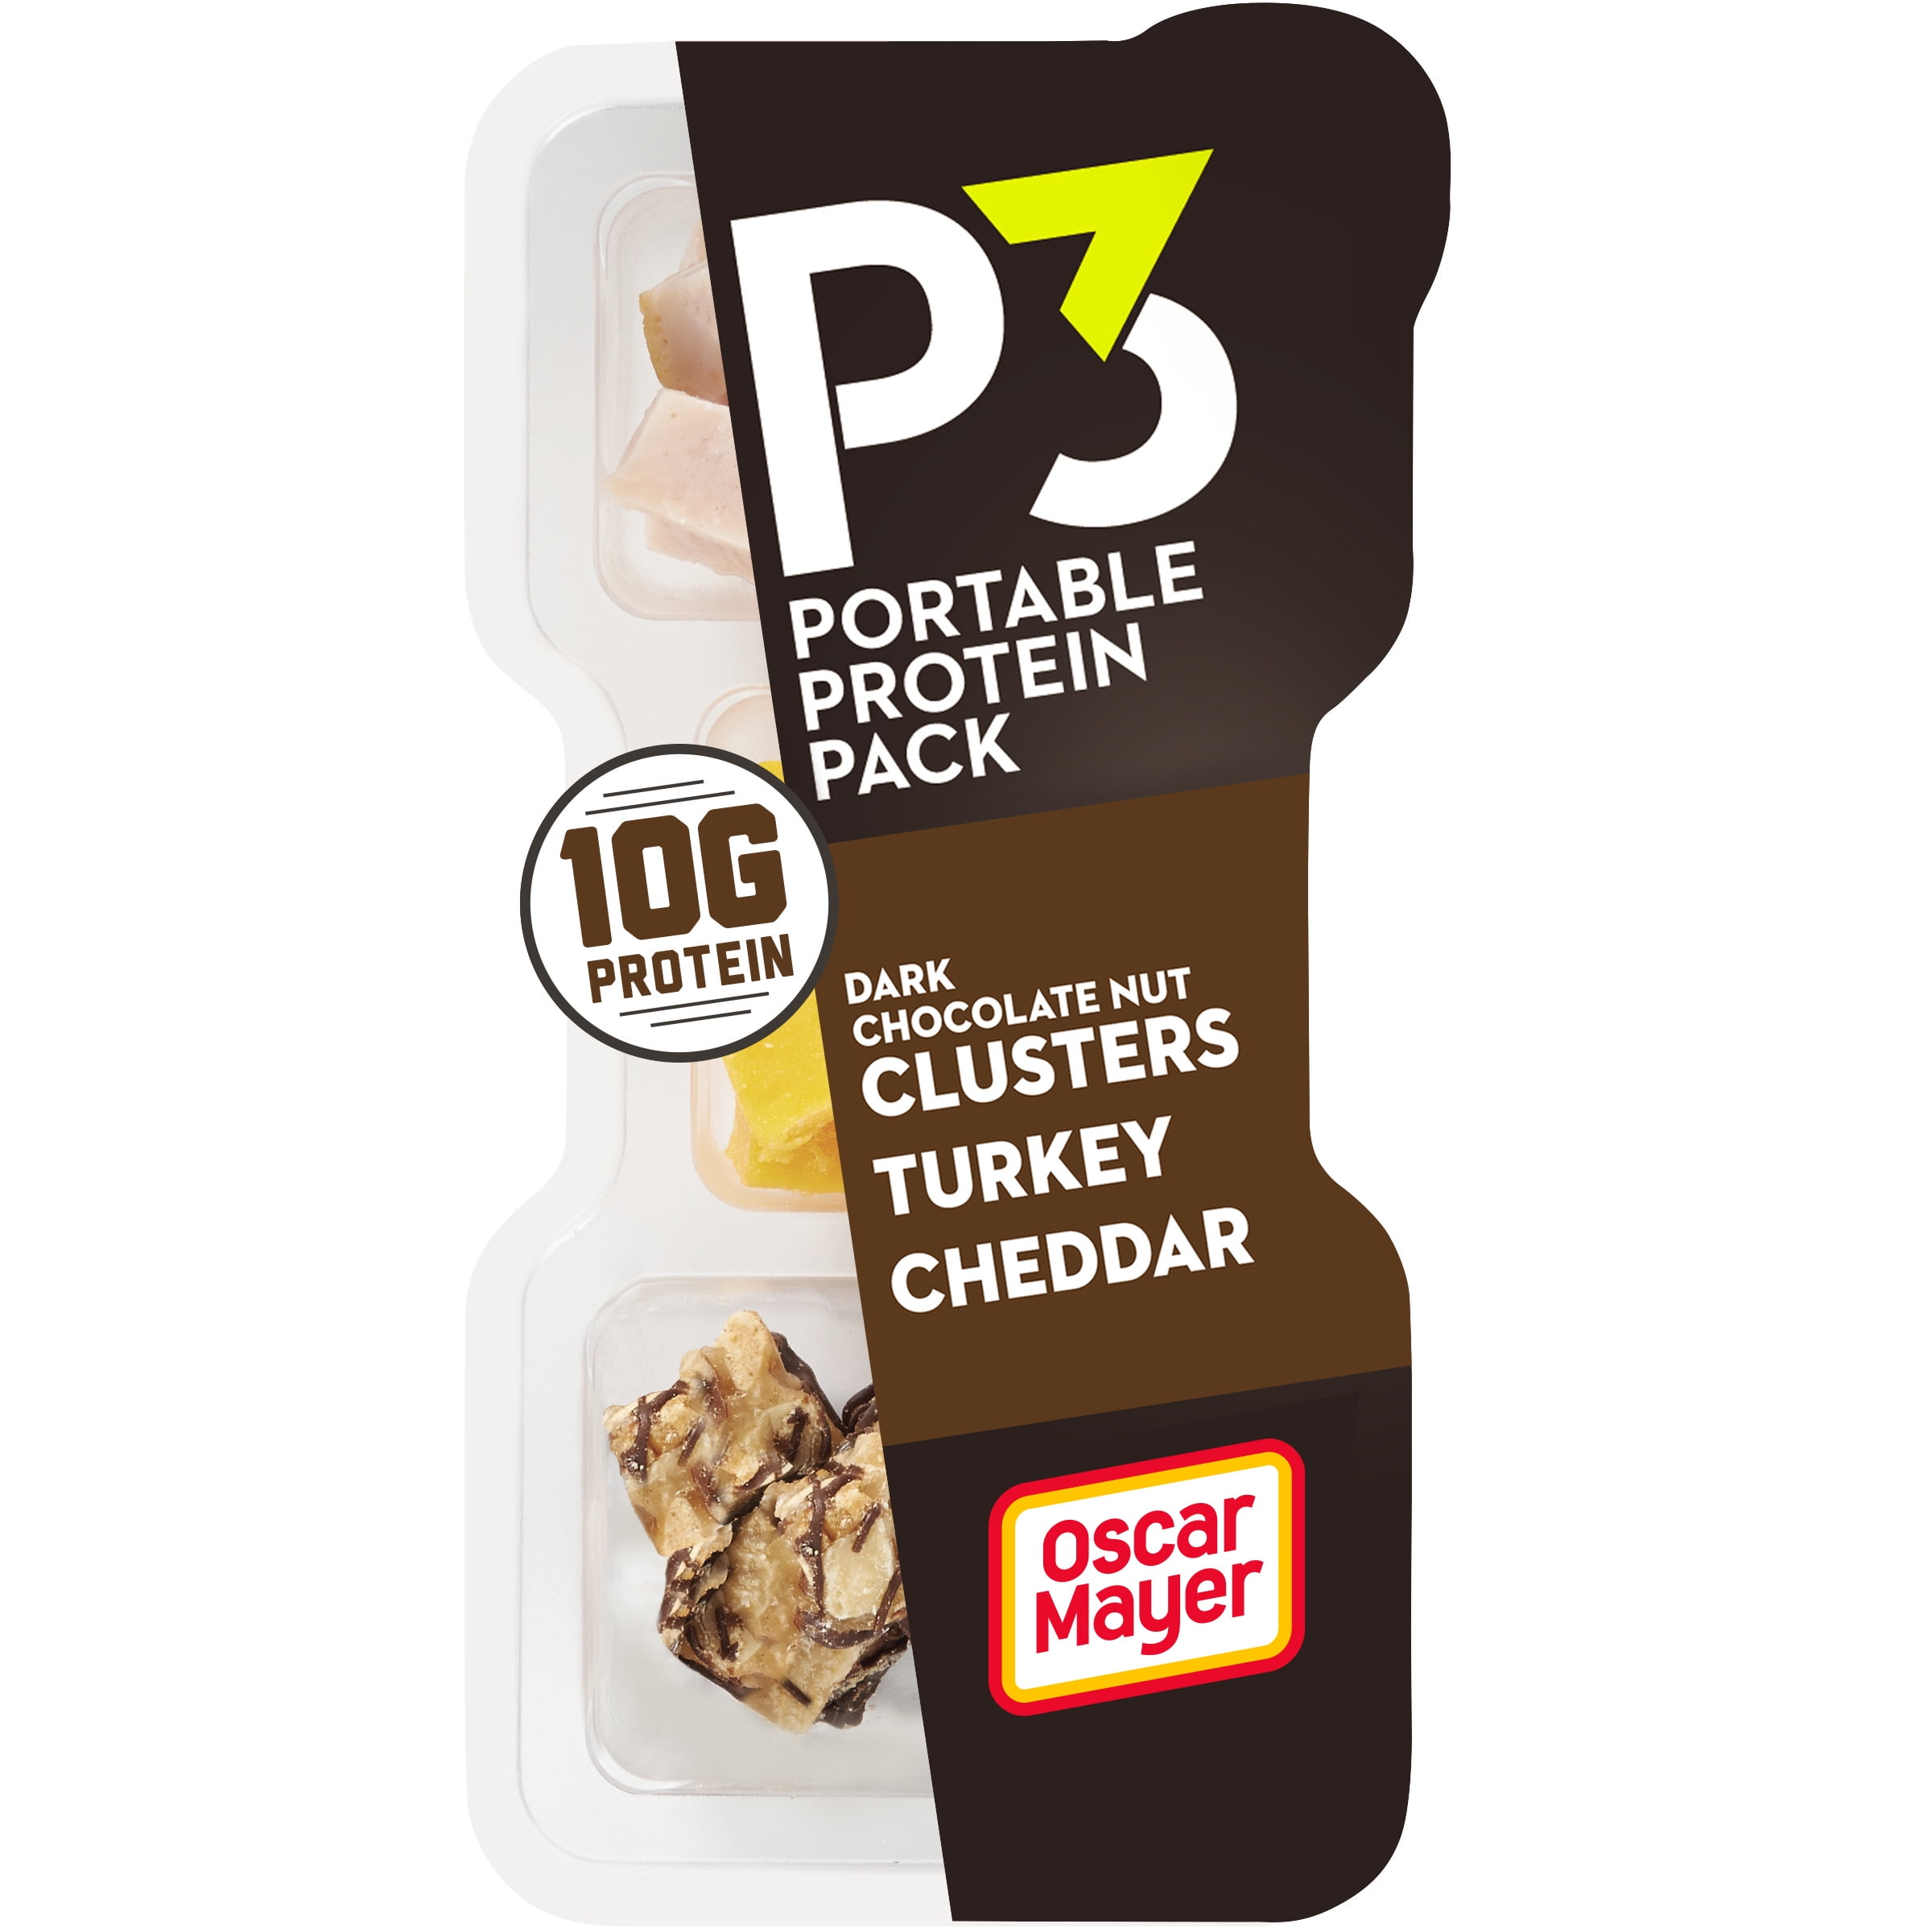 P3-Chocolate-Nut-Clusters-Turkey-Cheddar-Cheese-Protein-Snack-Pack-Pieces-2-oz-Tray_7850e6bb-3a20-4e62-9a5f-0792946494d7.ed649cbe7a539fabc036cf2abfdb48ac.jpeg